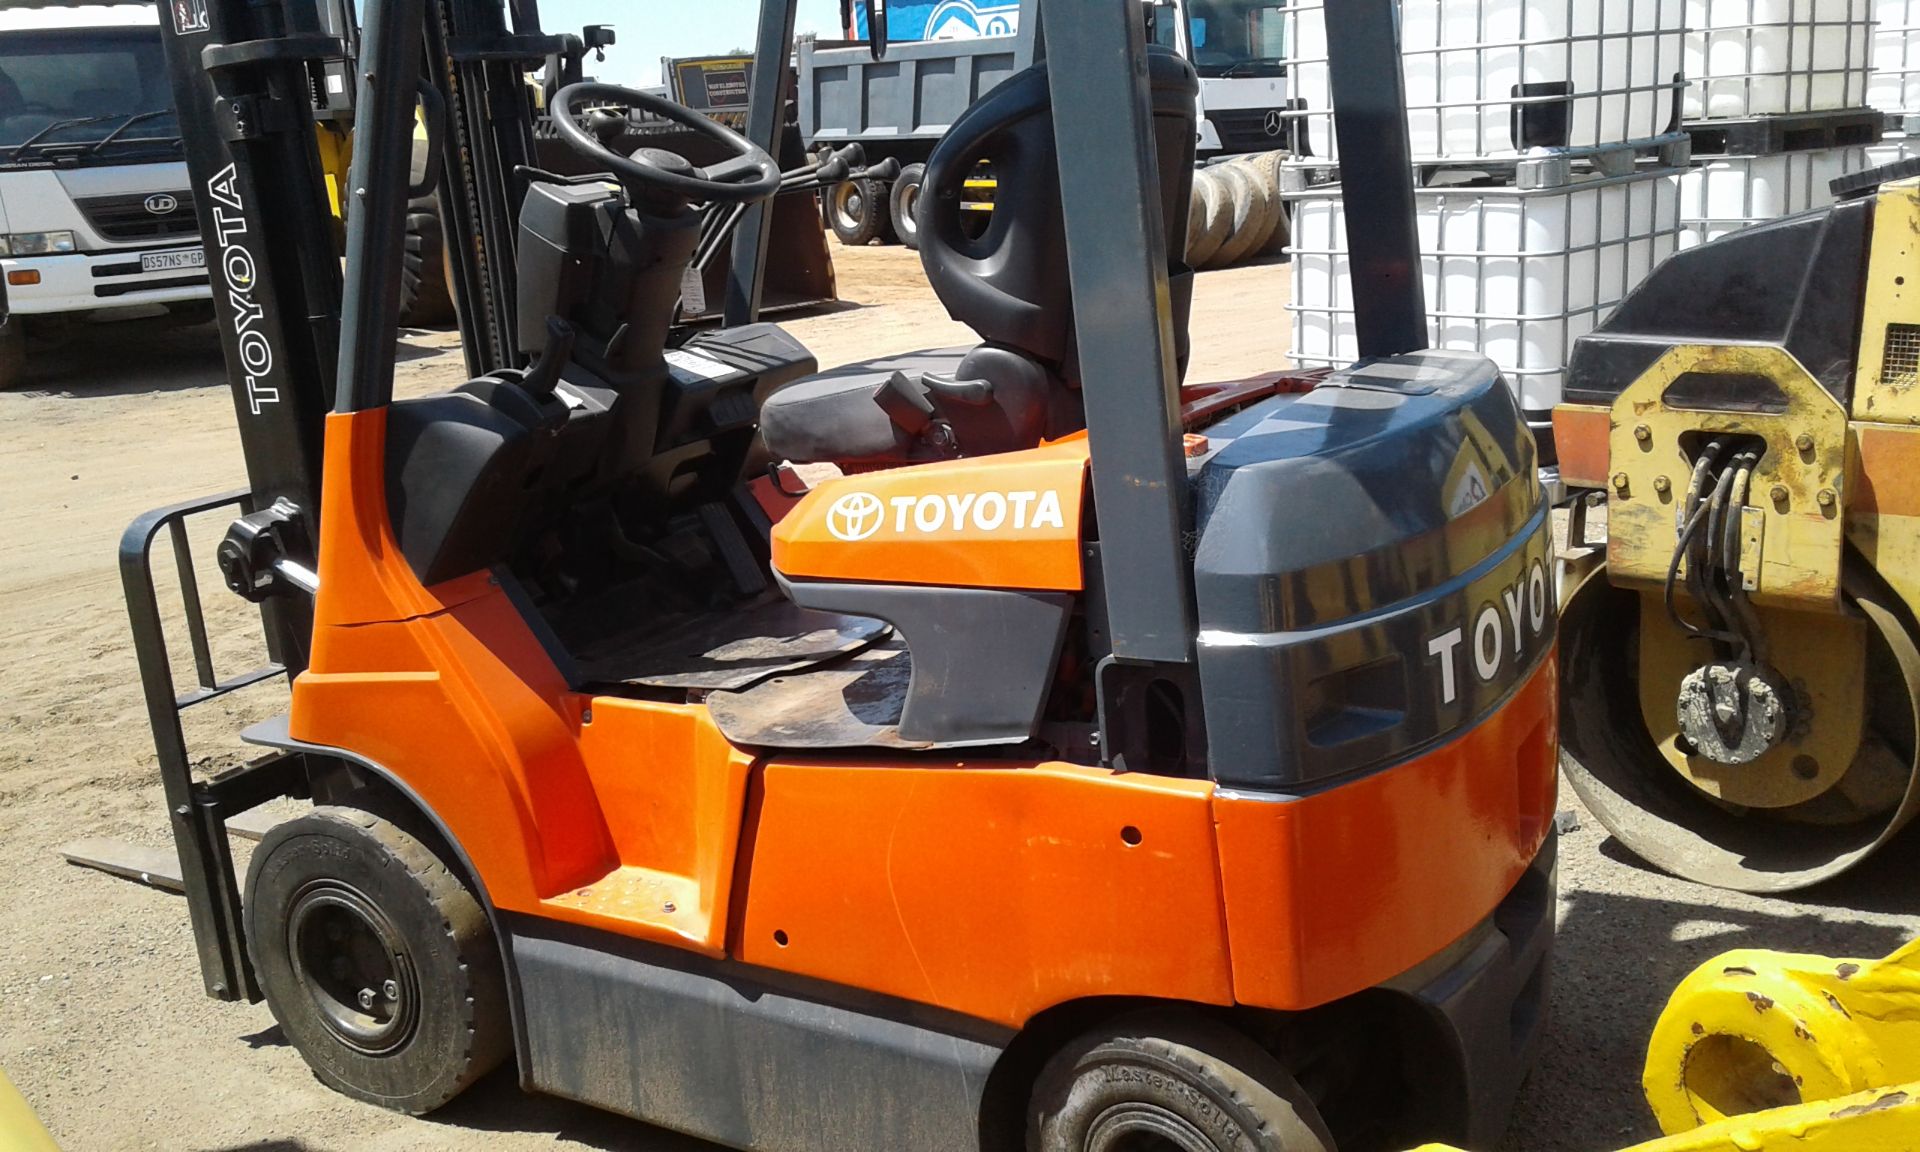 2003 TOYOTA 1.8 TON ELECTRIC FORKLIFT - (7FB1824075) - Image 2 of 3